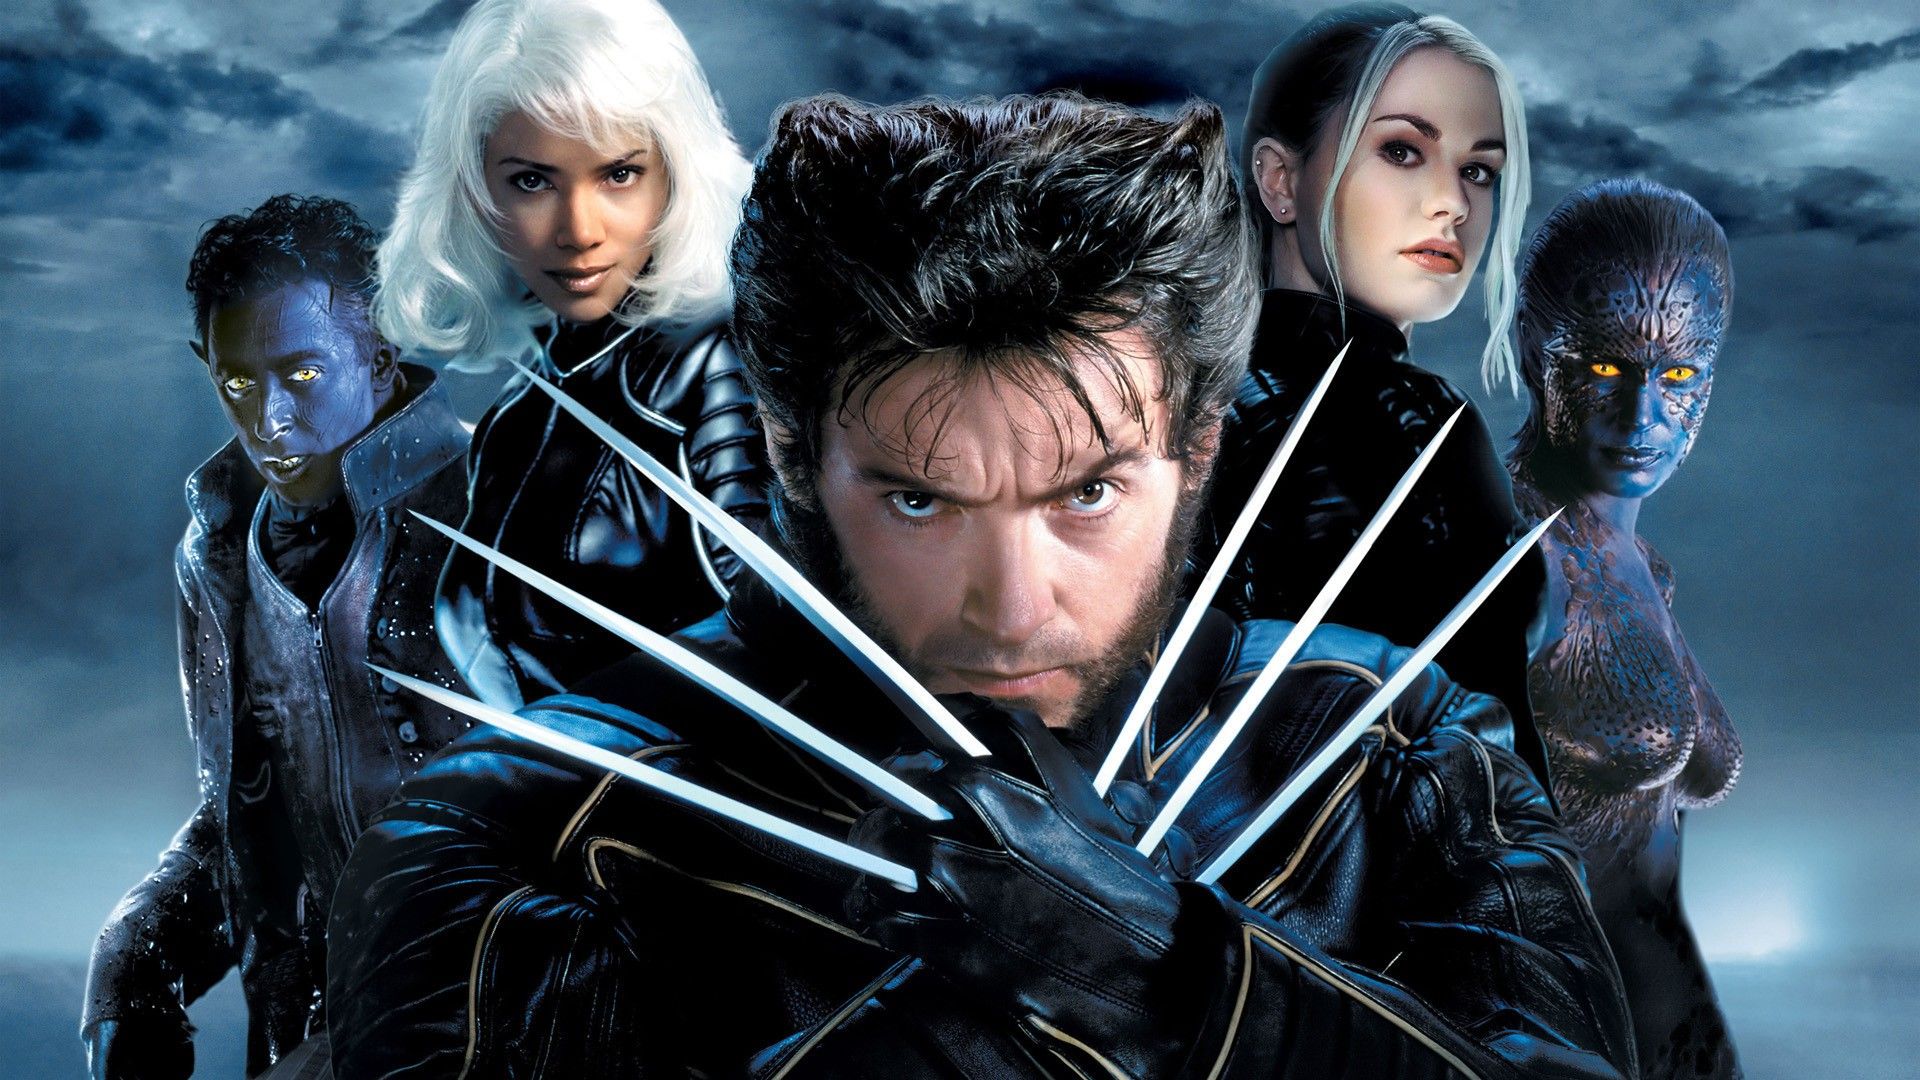 How To Watch The X Men Movies In Order: Chronological And Release Explained